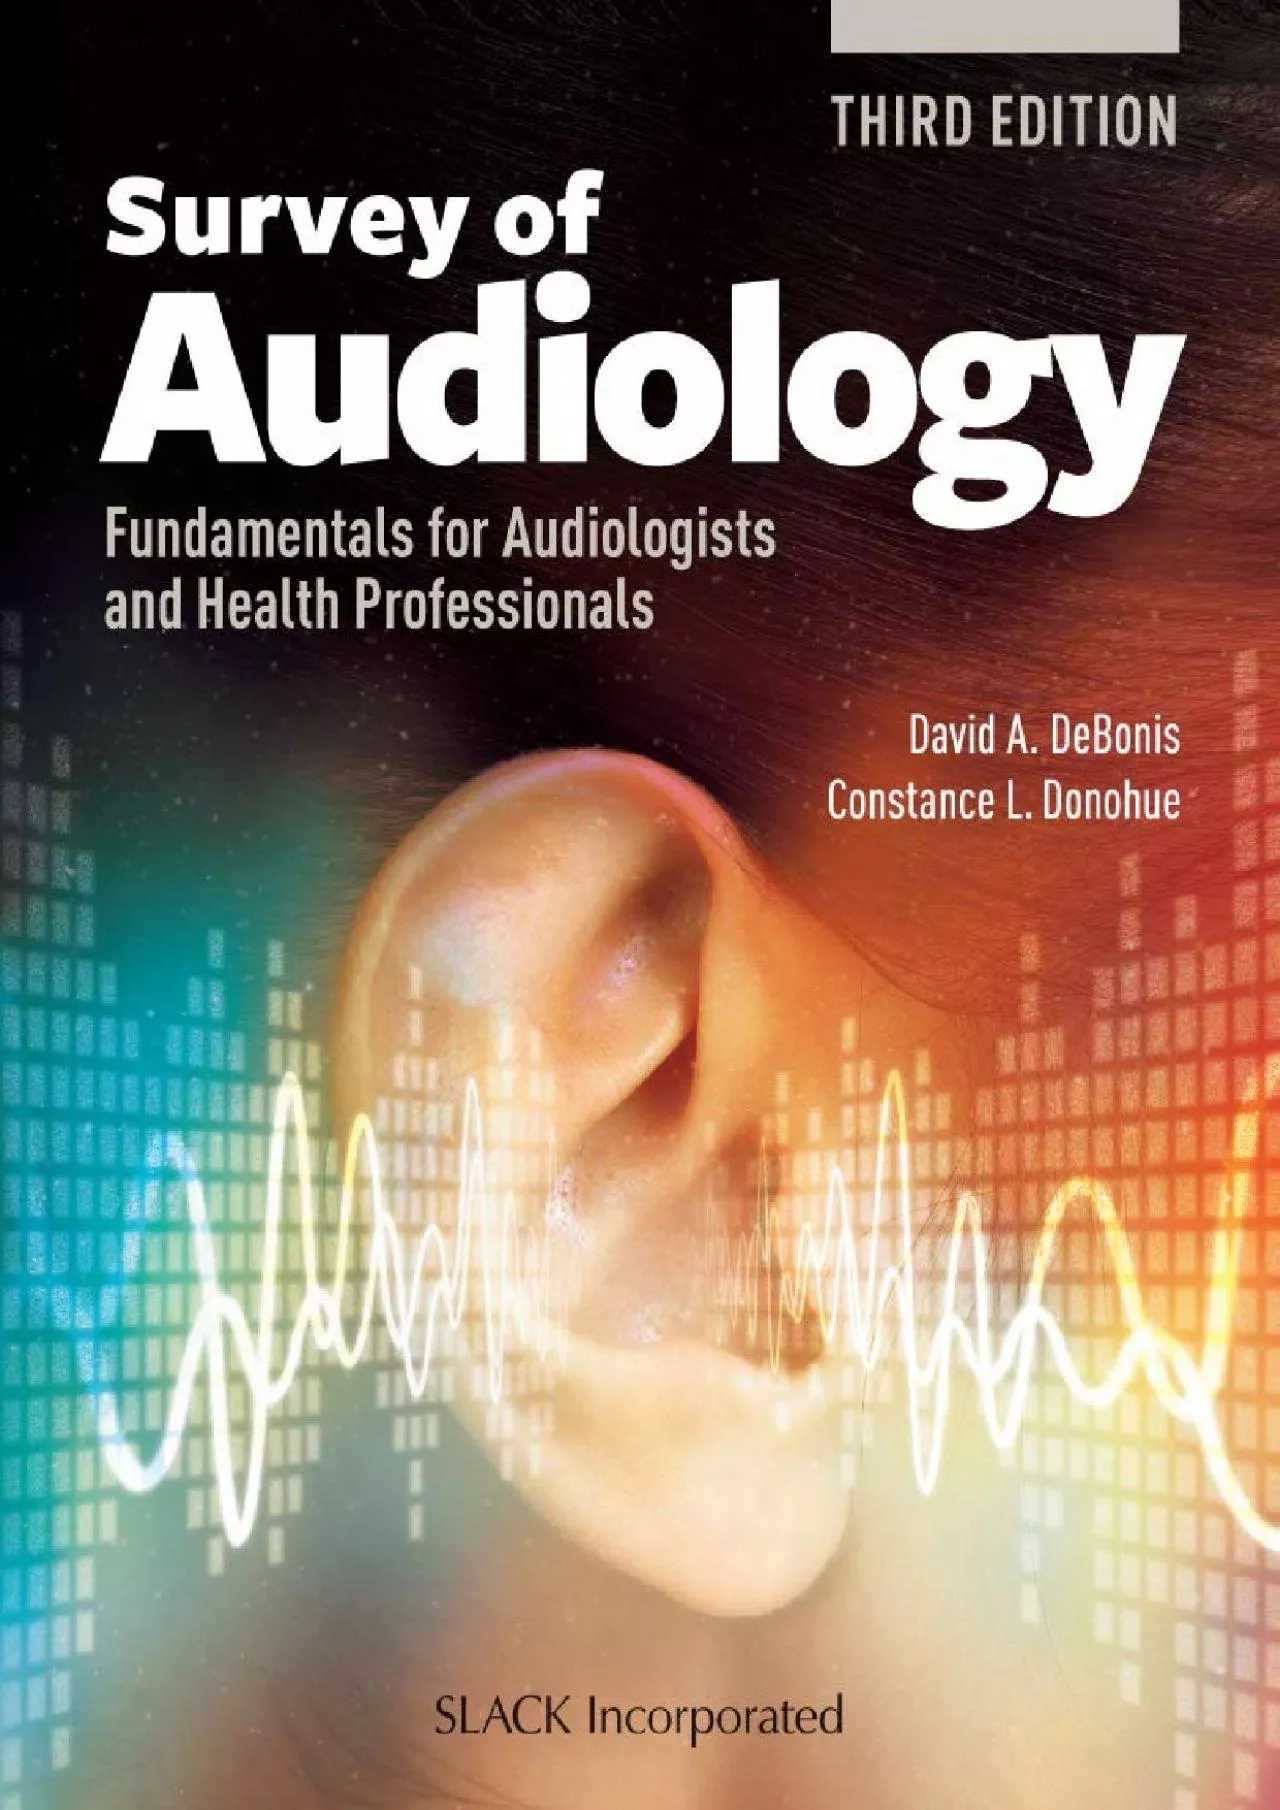 (BOOS)-Survey of Audiology: Fundamentals for Audiologists and Health Professionals, Third